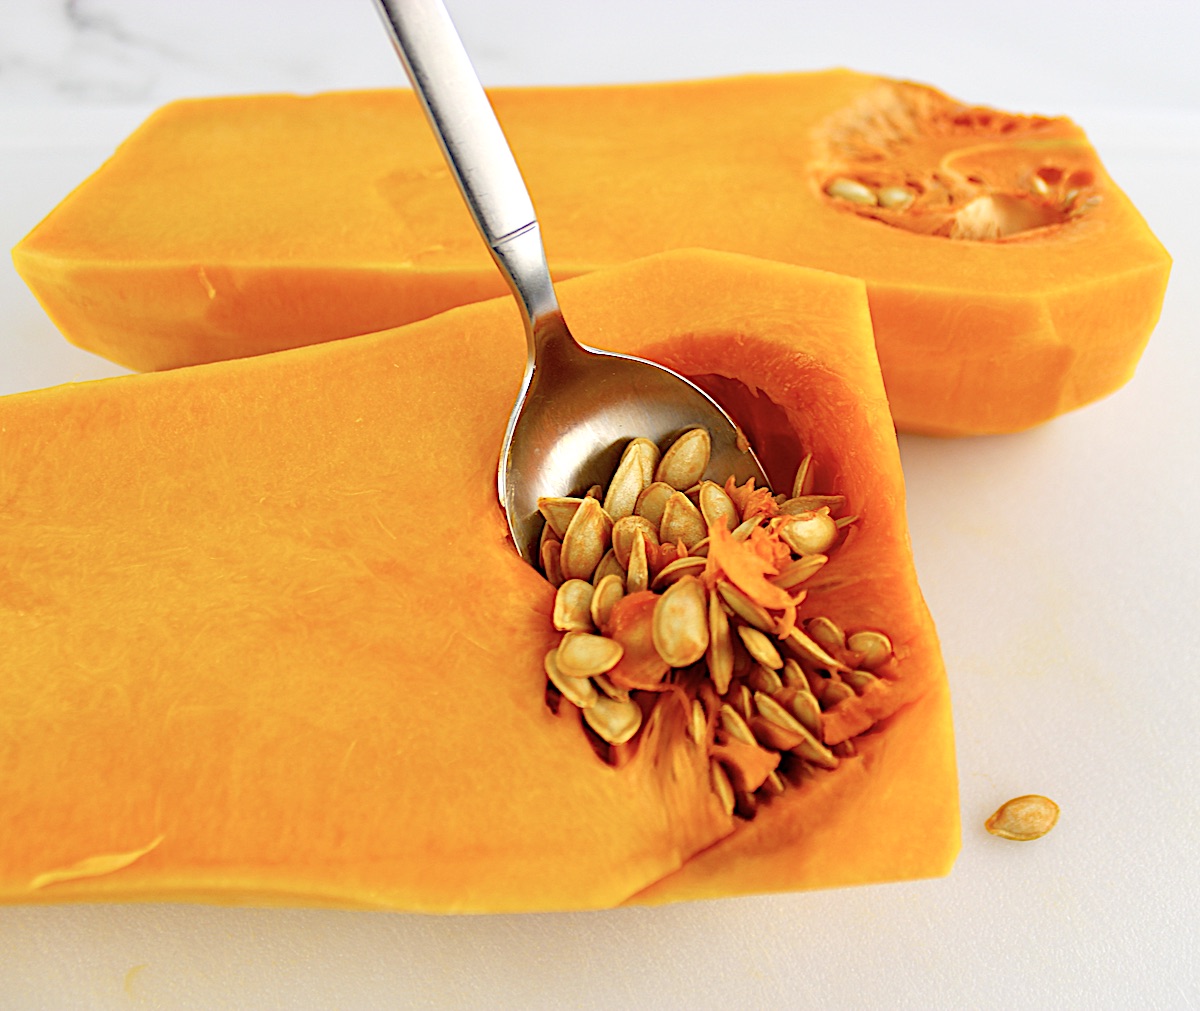 spoon scooping out the seeds of butternut squash on white cutting board